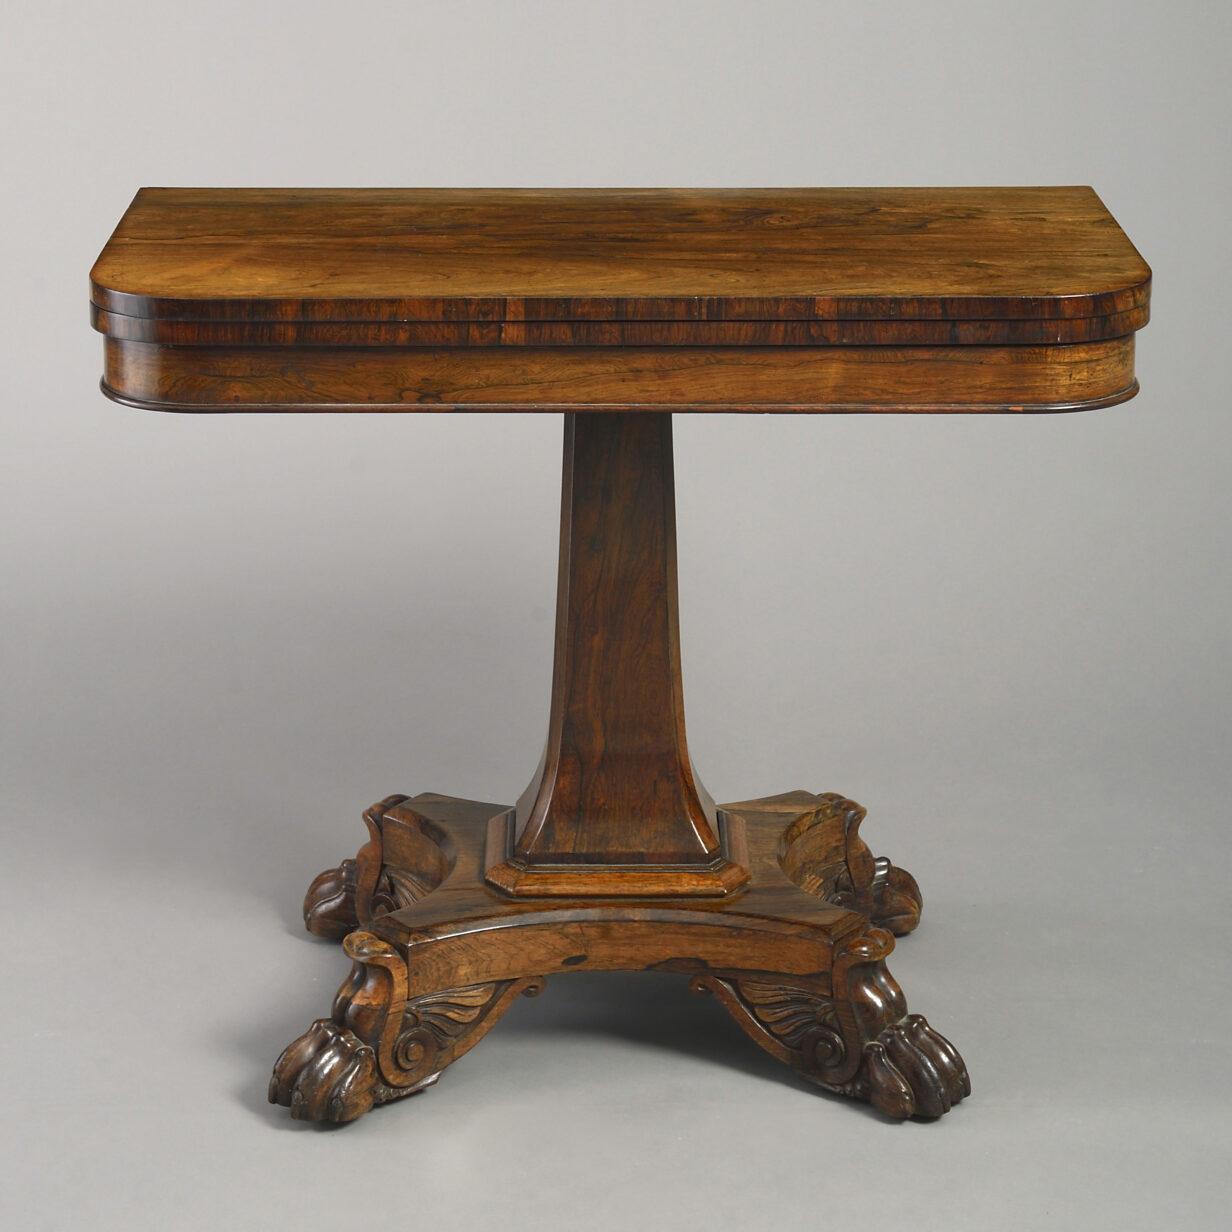 An early 19th century Regency period finely figured rosewood tea table, the D-shaped top swiveling to reveal a recess, set upon a square tapering stem, the concave plinth base terminating in richly carved winged lion paw feet.